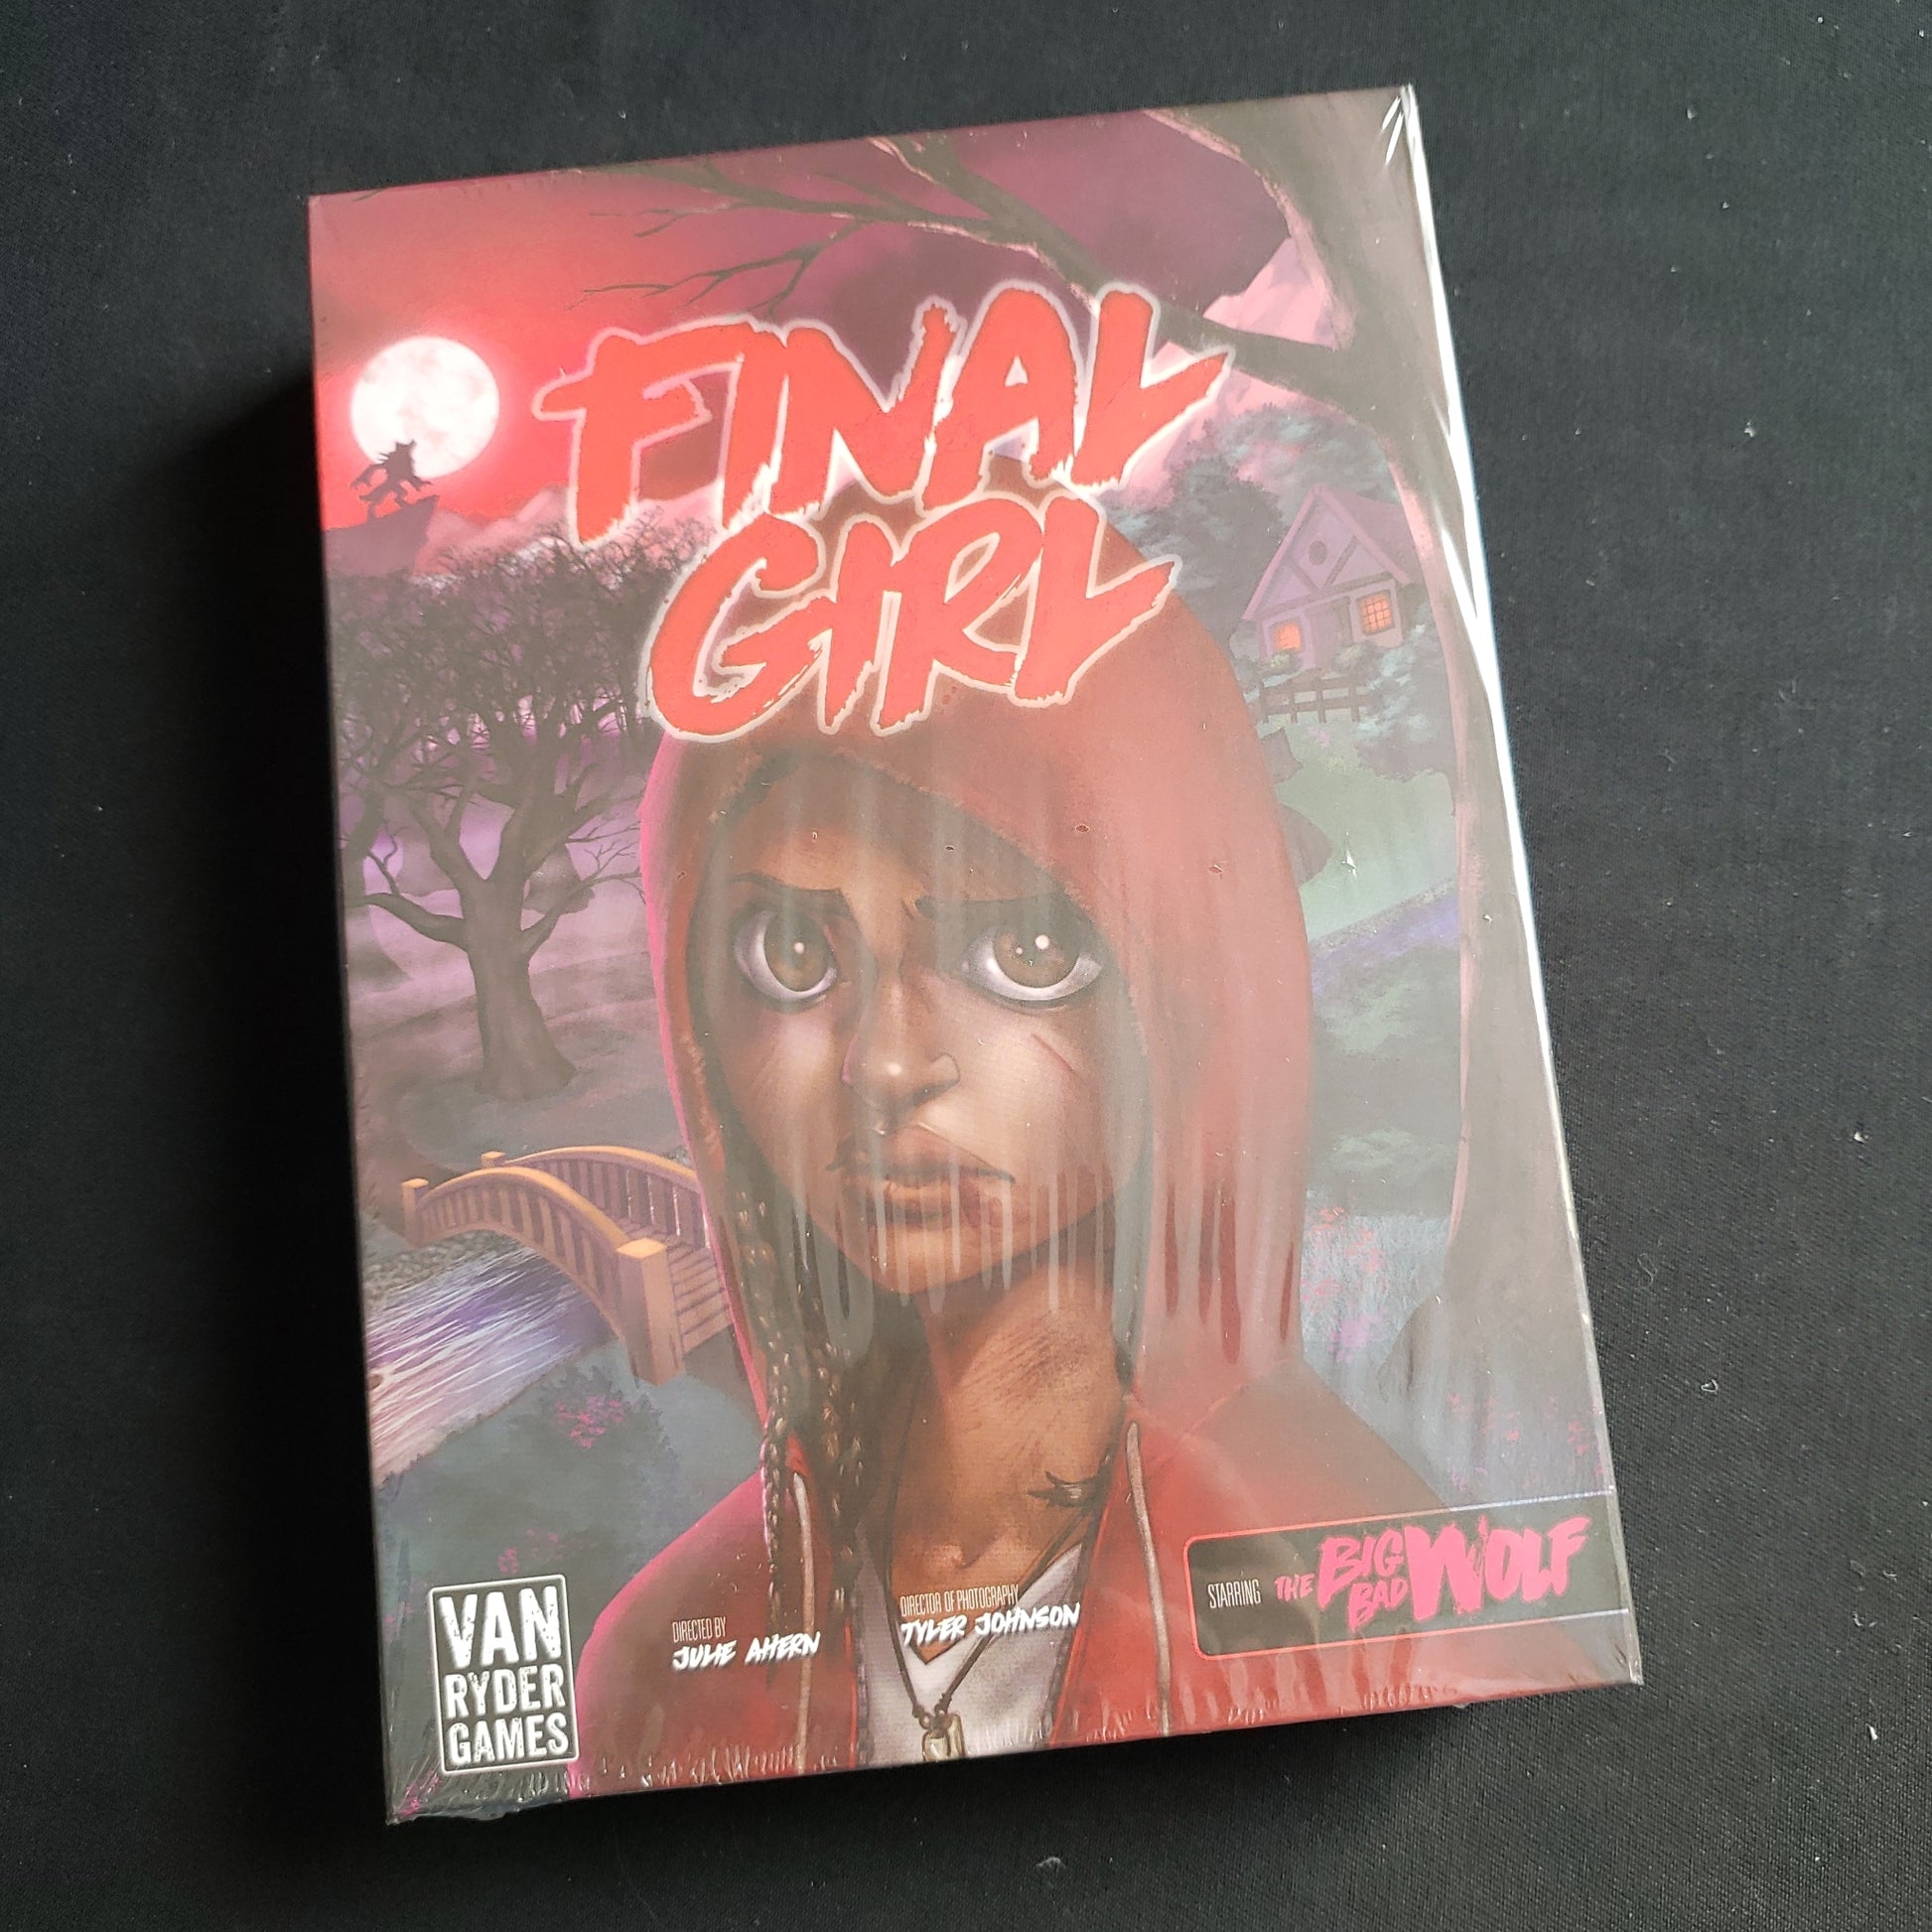 Image shows the front of the box for the Once Upon a Full Moon Feature Film Expansion for the Final Girl board game